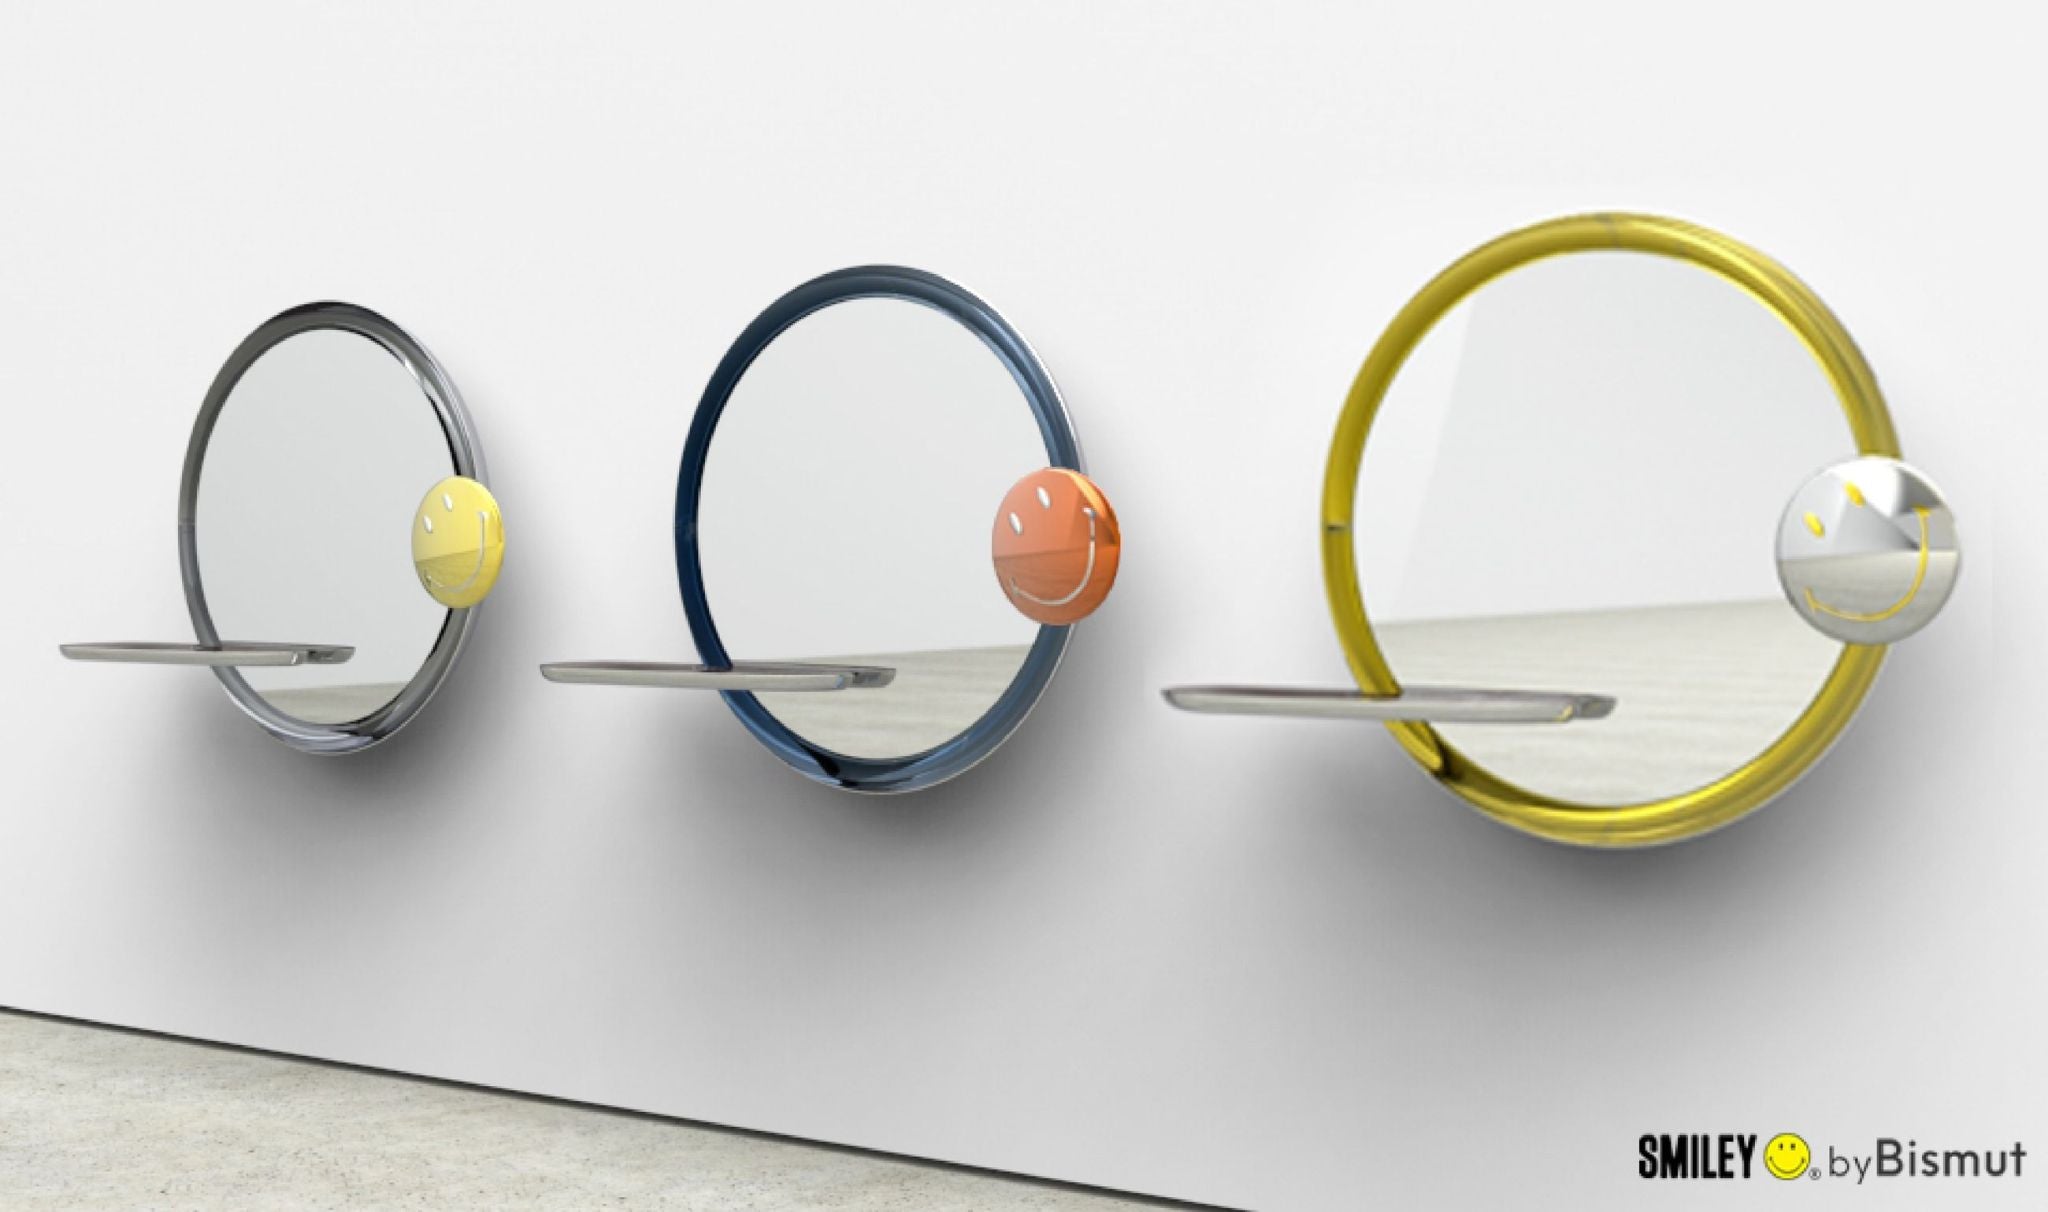 Three mirrors from the Bismut & Bismut x Smiley partnership, each with a worn wooden shelf and small Smiley floating over a tinted polished plate. The barber’s polished bubble mirror has a small gold Smiley face attached.